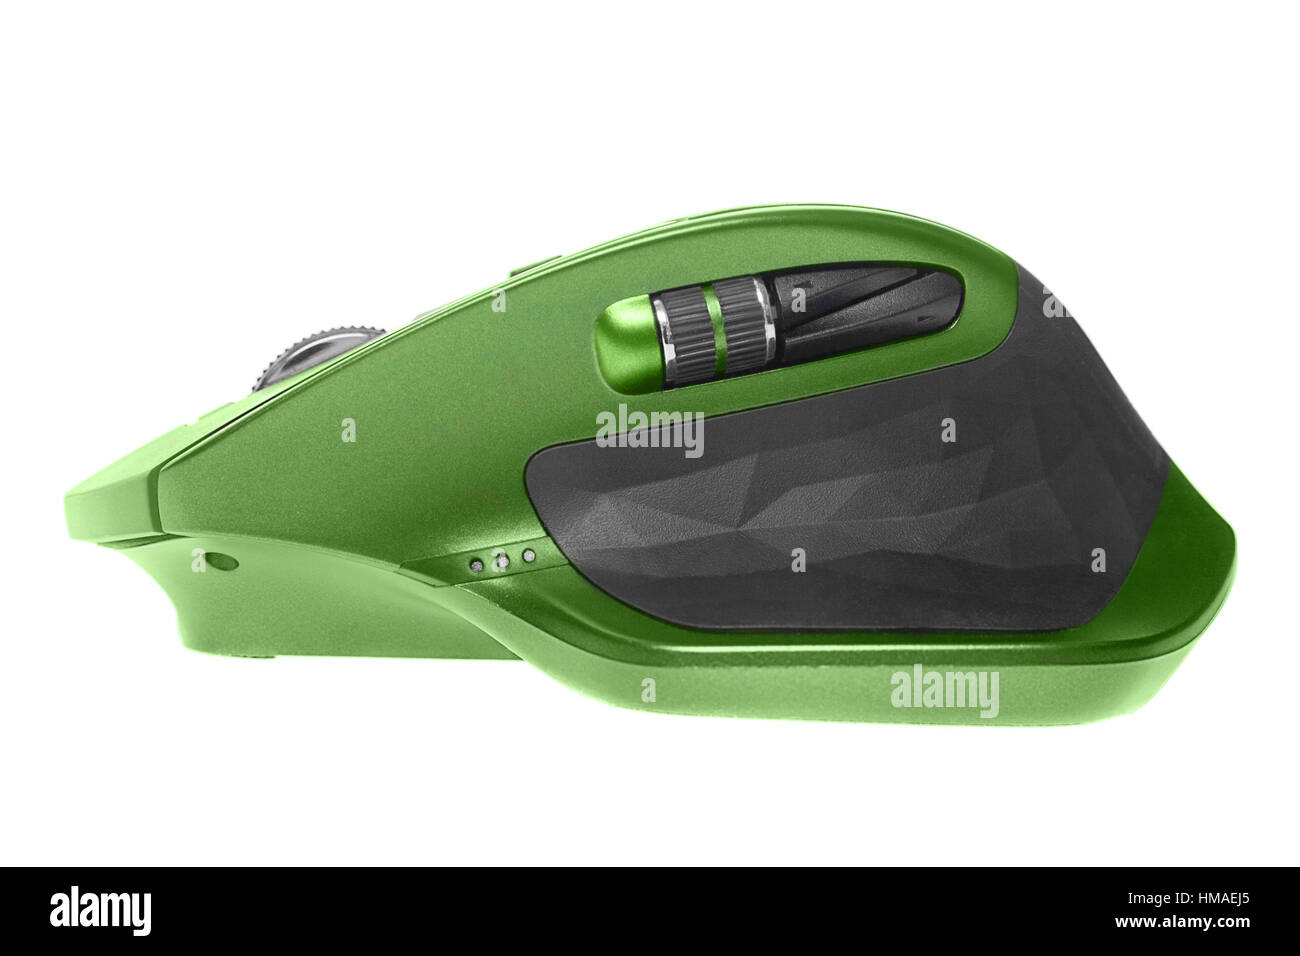 Wireless computer mouse. Green color. Isolated on white background Stock Photo